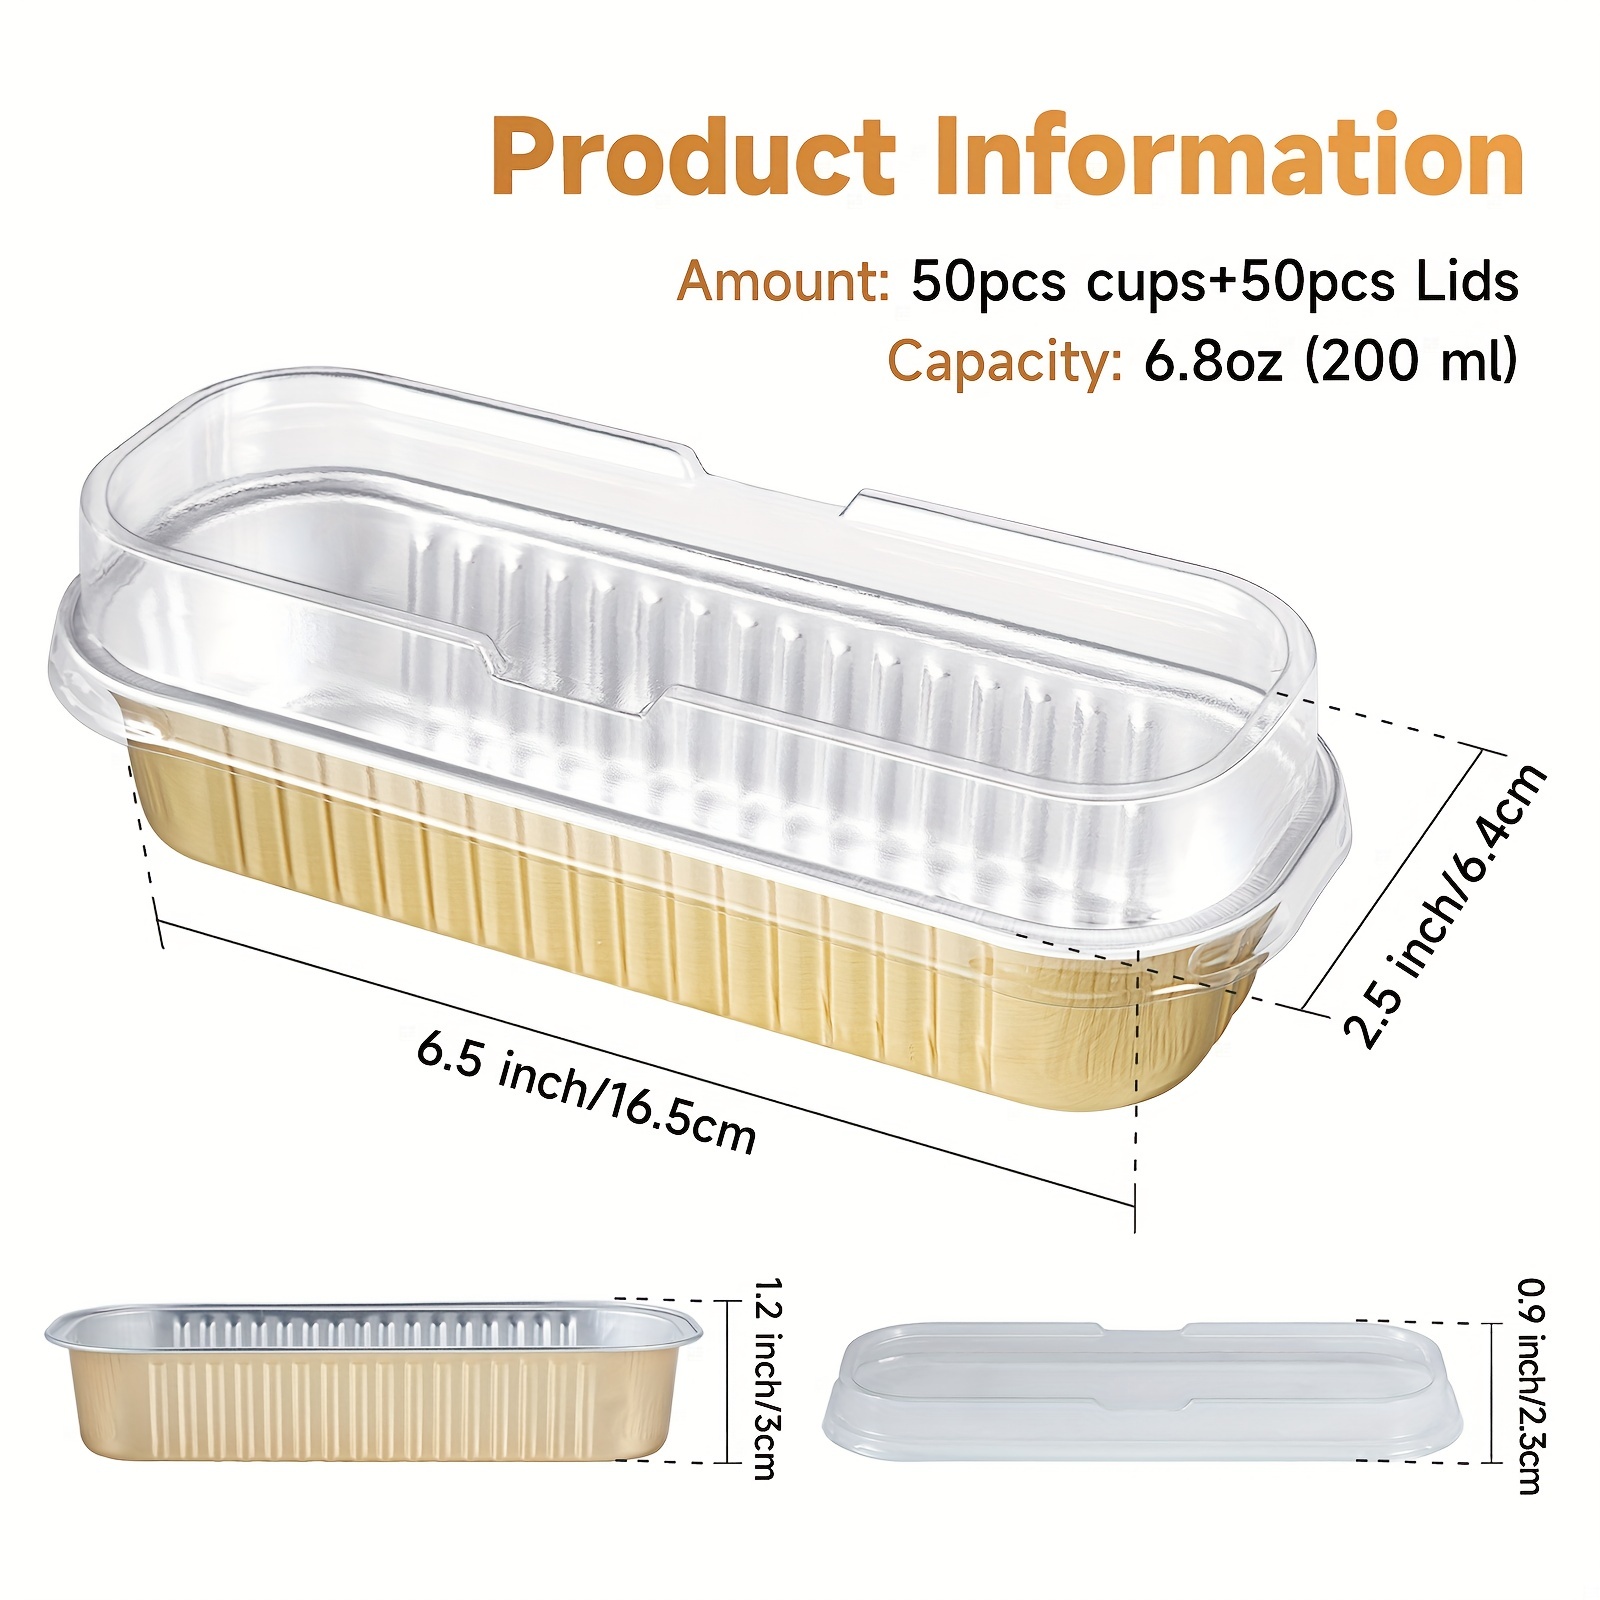 7 oz Rectangle Coffee Aluminum Baking Loaf Pan - with Plastic